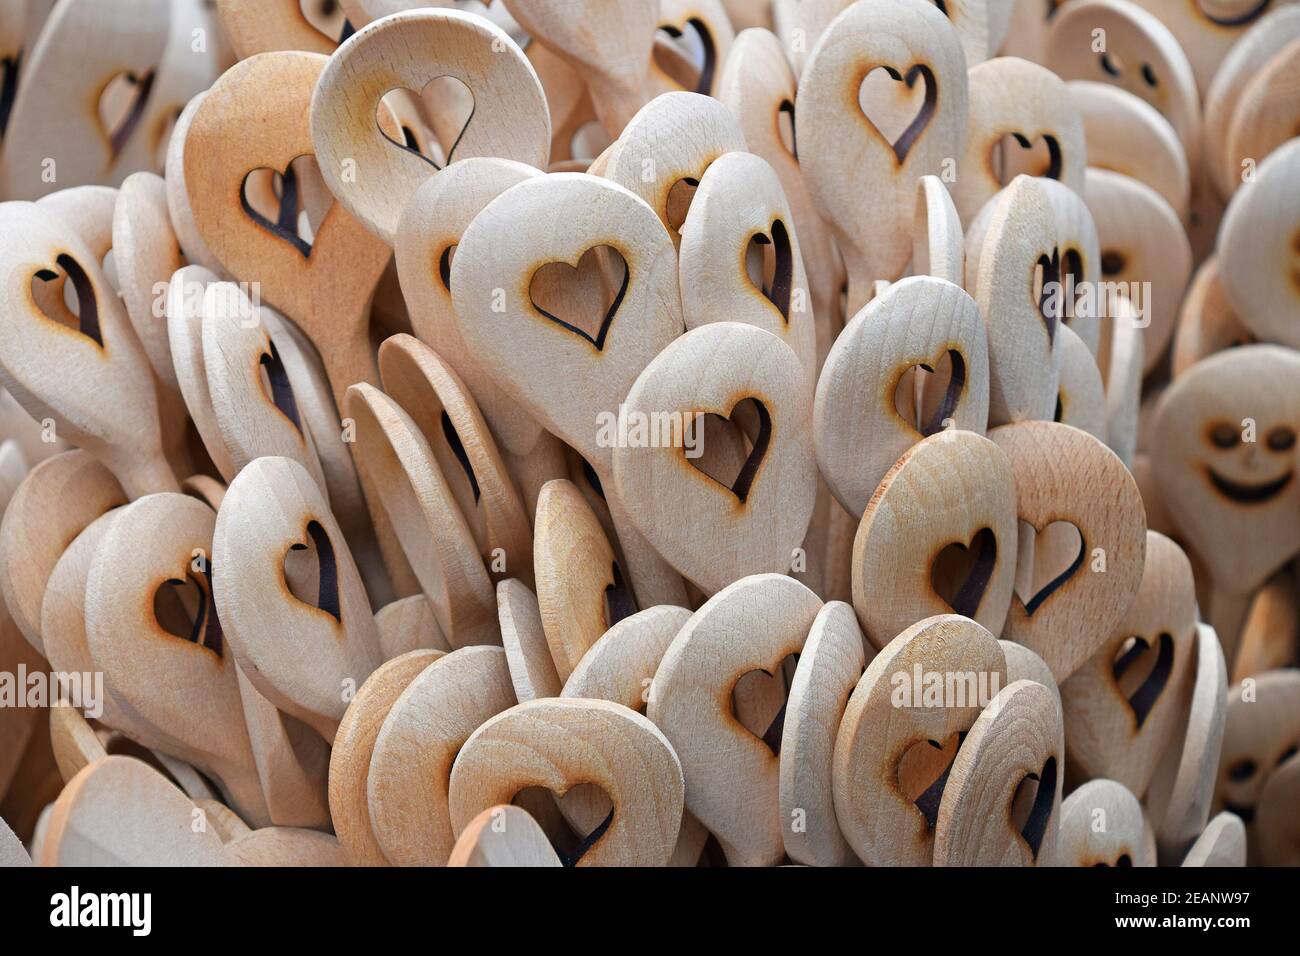 Wooden cooking spoons with heart shape carved Stock Photo